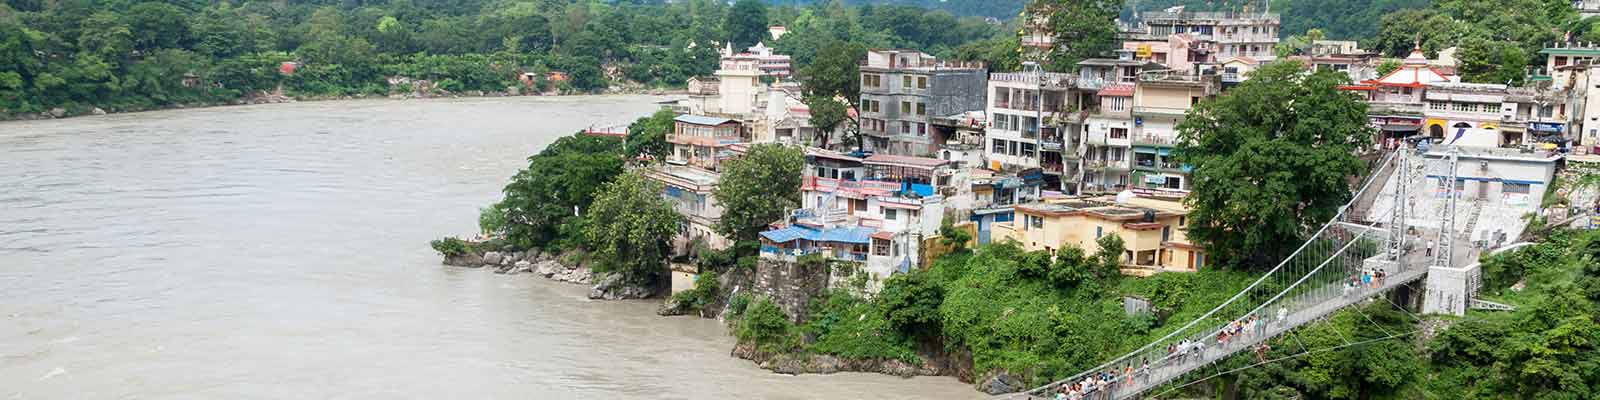 Couple Friendly Hotels in Rishikesh, Hotels for Unmarried Couples Rishikesh